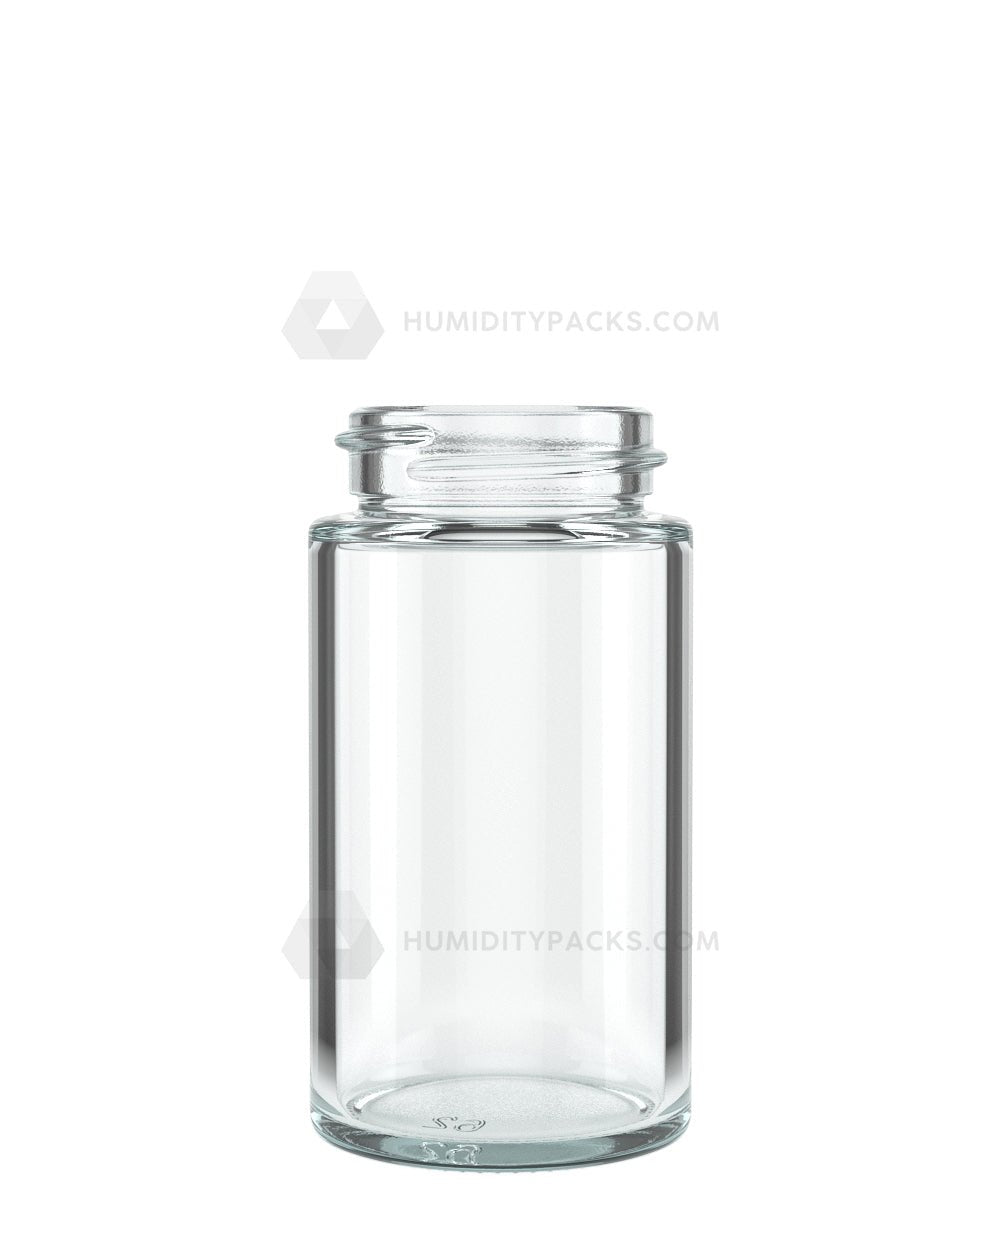 38mm Wide Mouth Straight Clear 2oz Glass Jar 180/Box Humidity Packs - 1